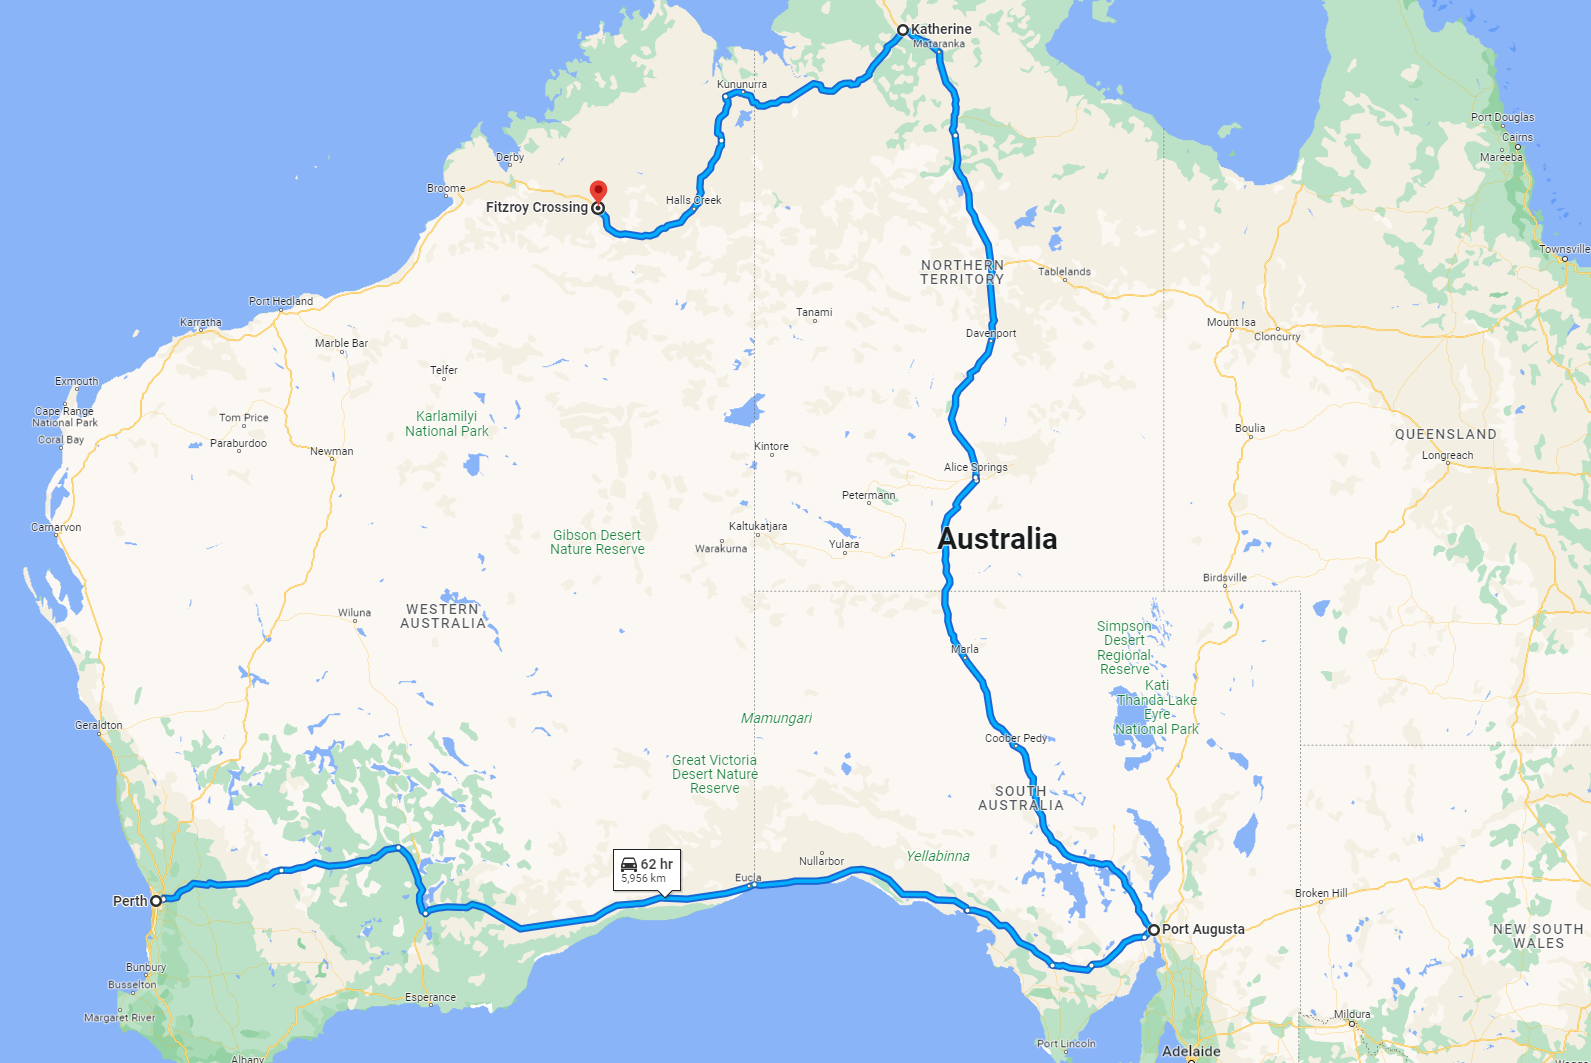 A screenshot from Google Maps showing the long drive from Perth, to Port Augusta, to Katherine, to Fitzroy Crossing